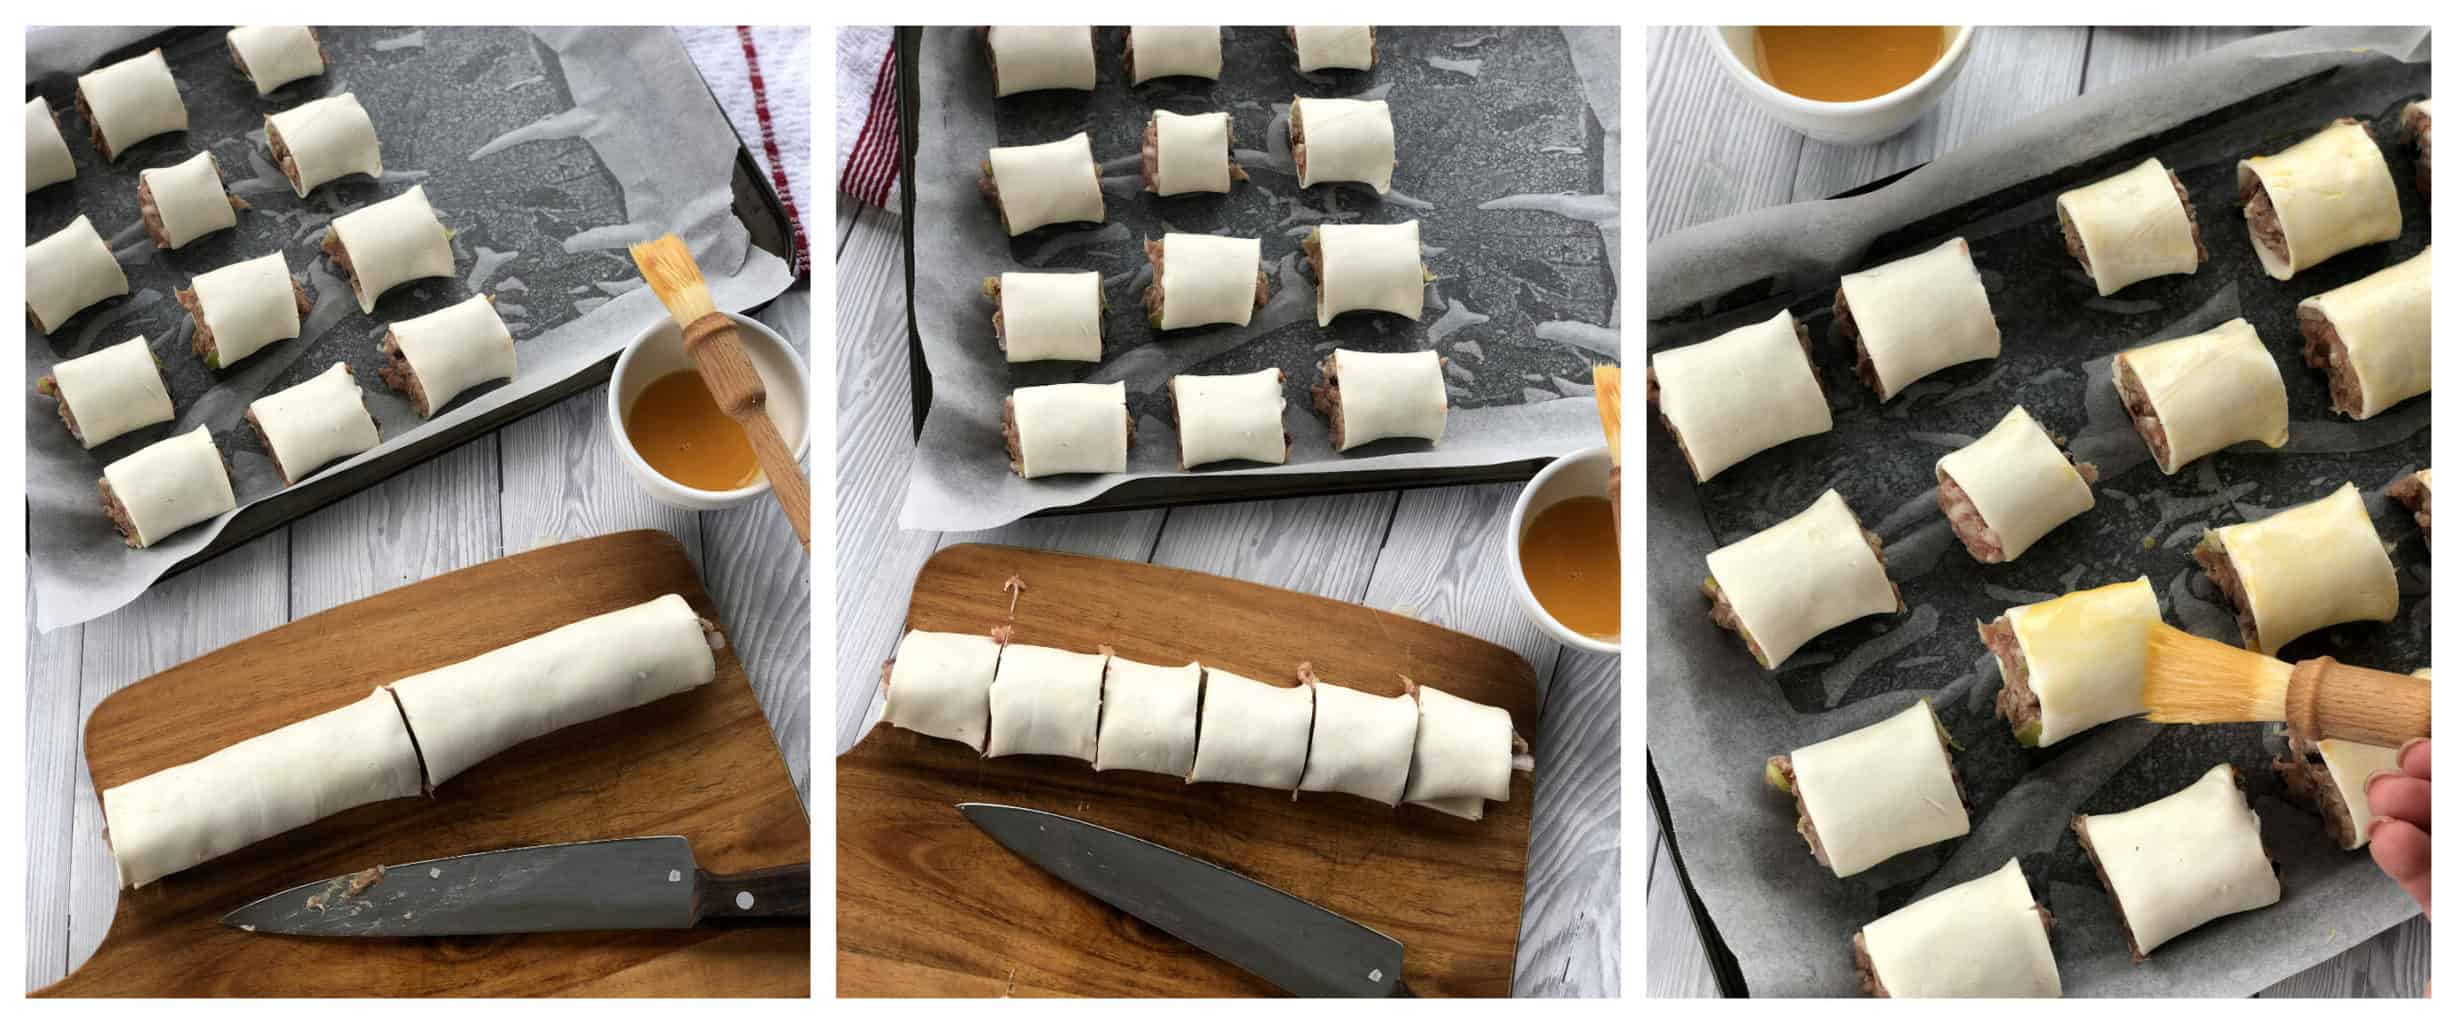 How to cut sausage rolls 